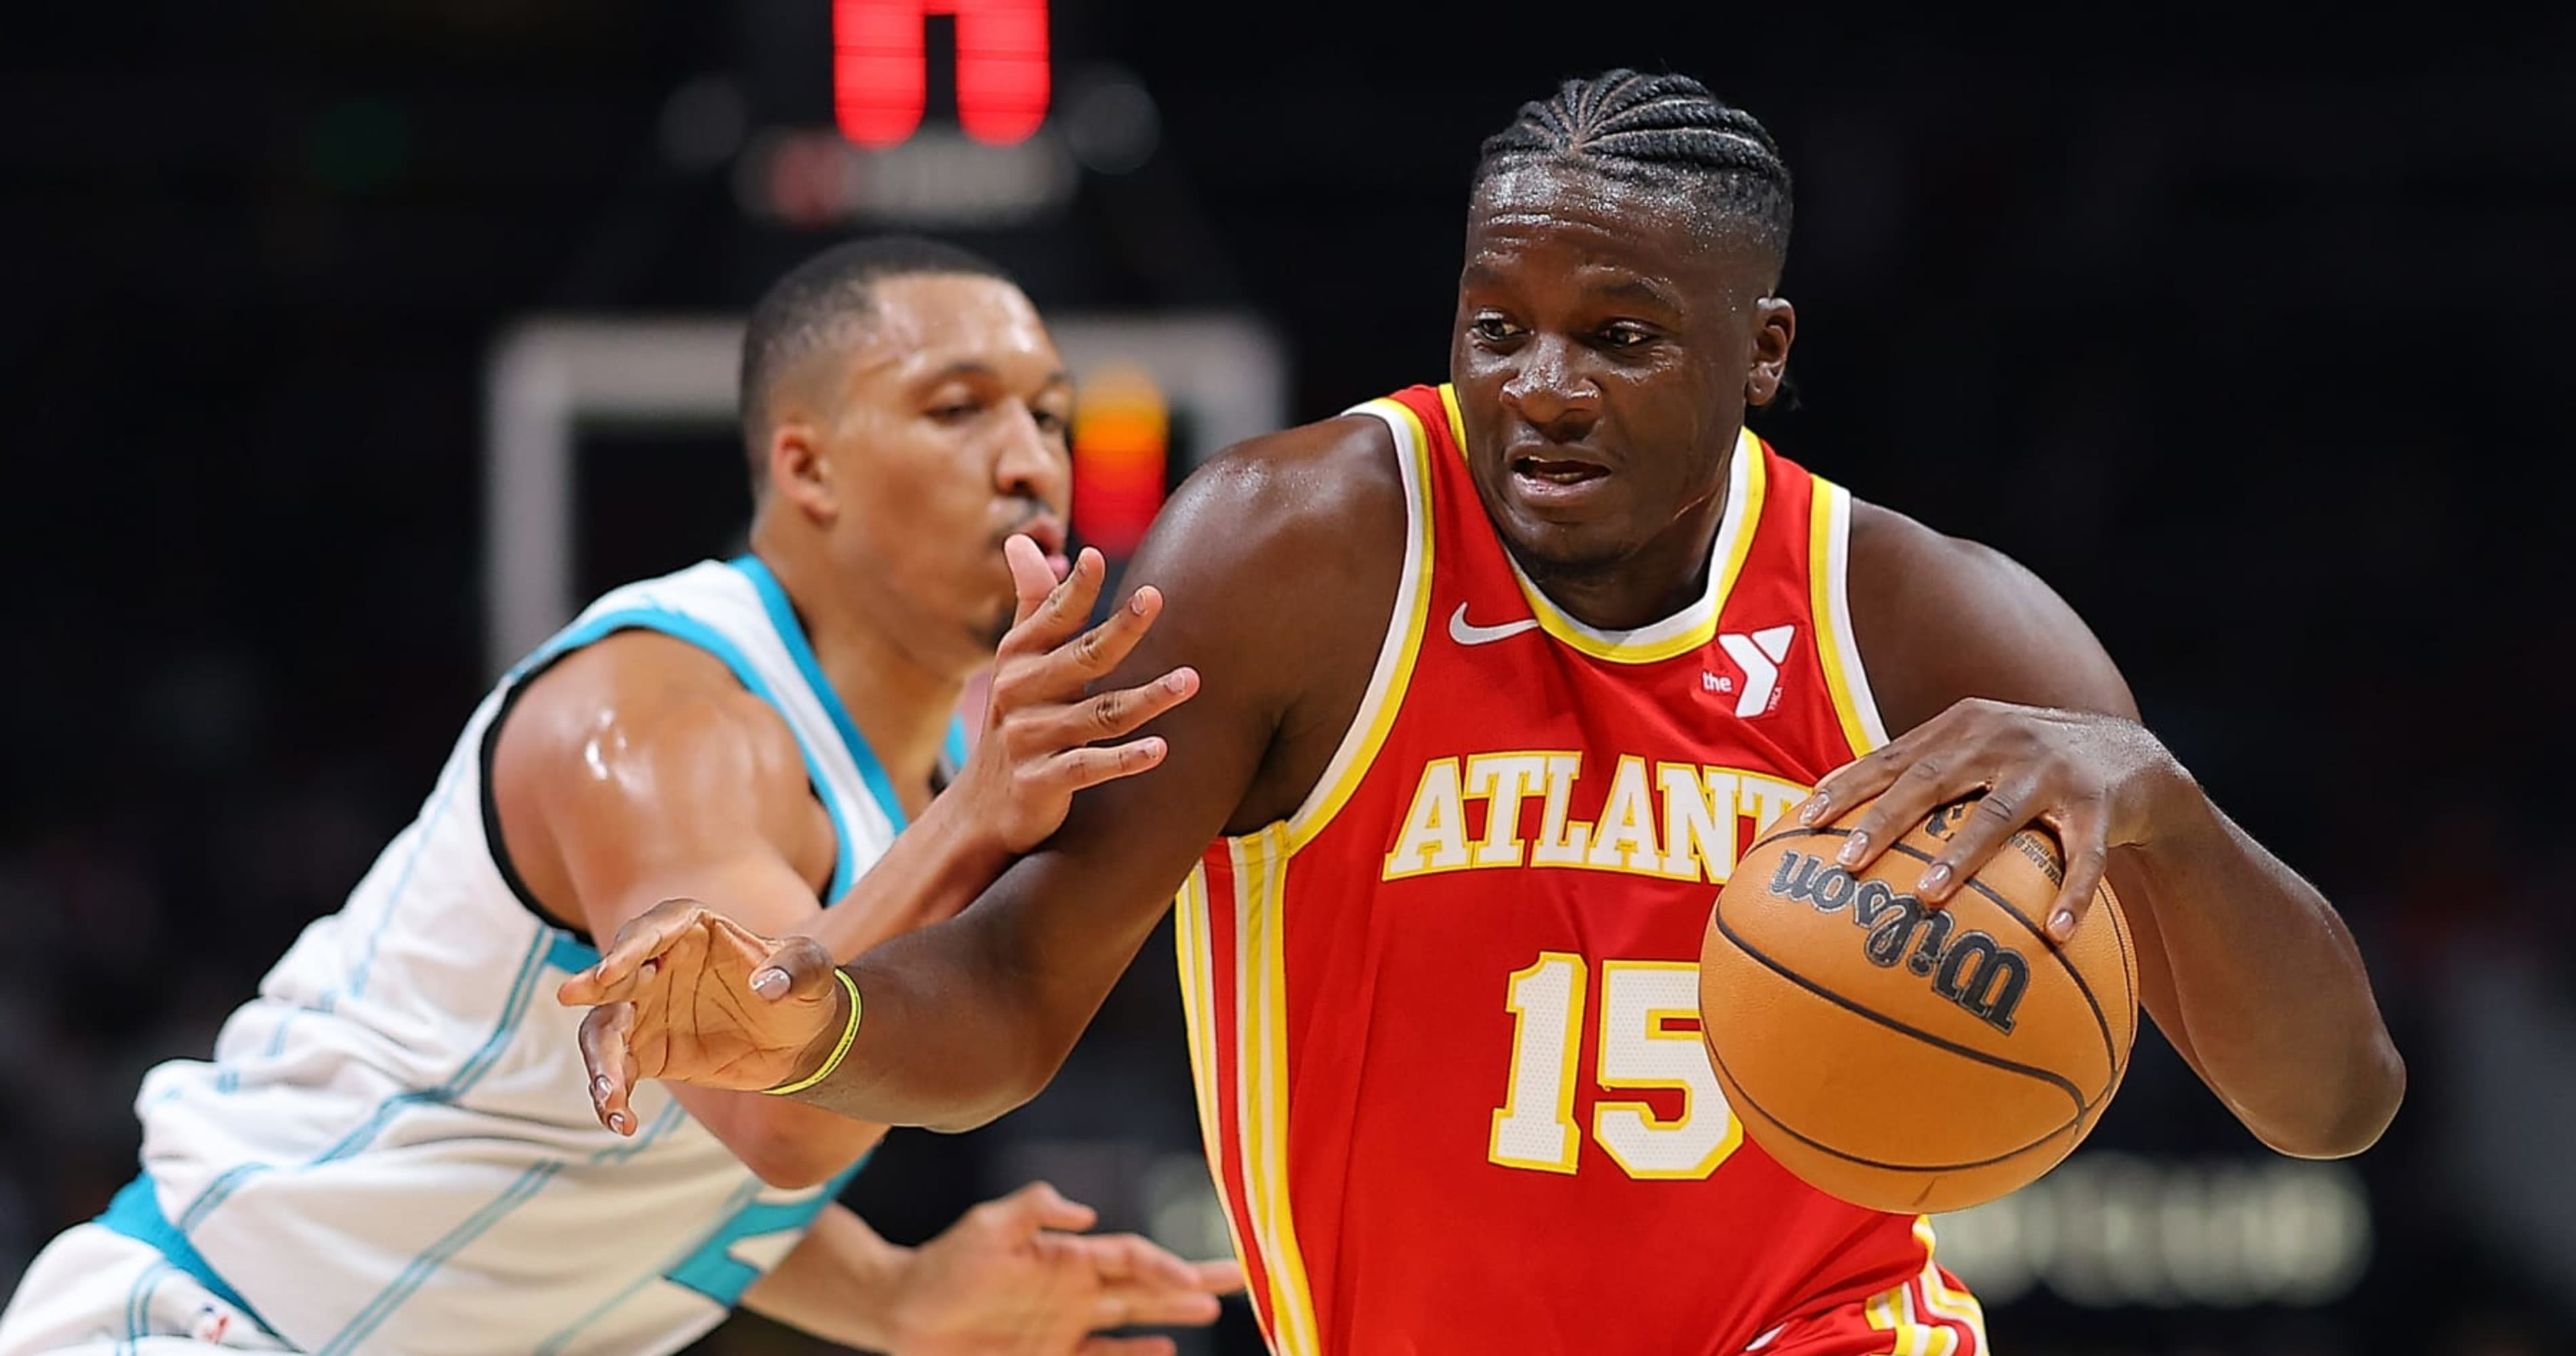 NBA Rumors: Hawks' Clint Capela 'Likely' to Be on Trade Market During Offseason